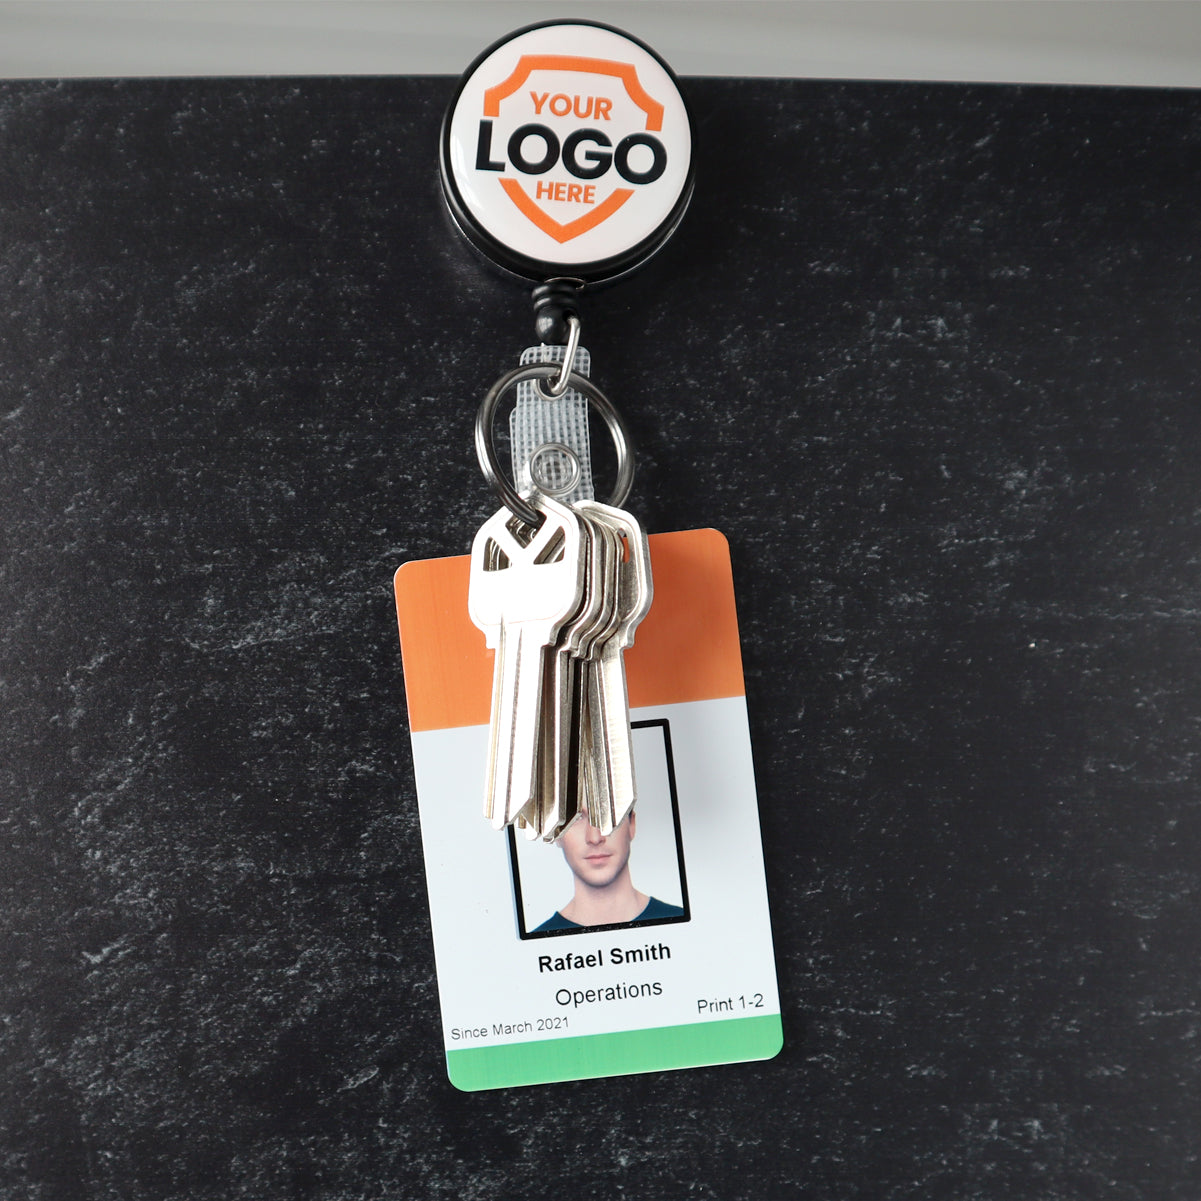 A personalized identification display featuring an employee ID badge with the name "Rafael Smith," a photo, and keys attached, is showcased against a dark background. The Custom Heavy Duty Badge Reel with Key Ring and Badge Strap (SPID-3180) - Add Your Logo adds an extra touch of durability and style.